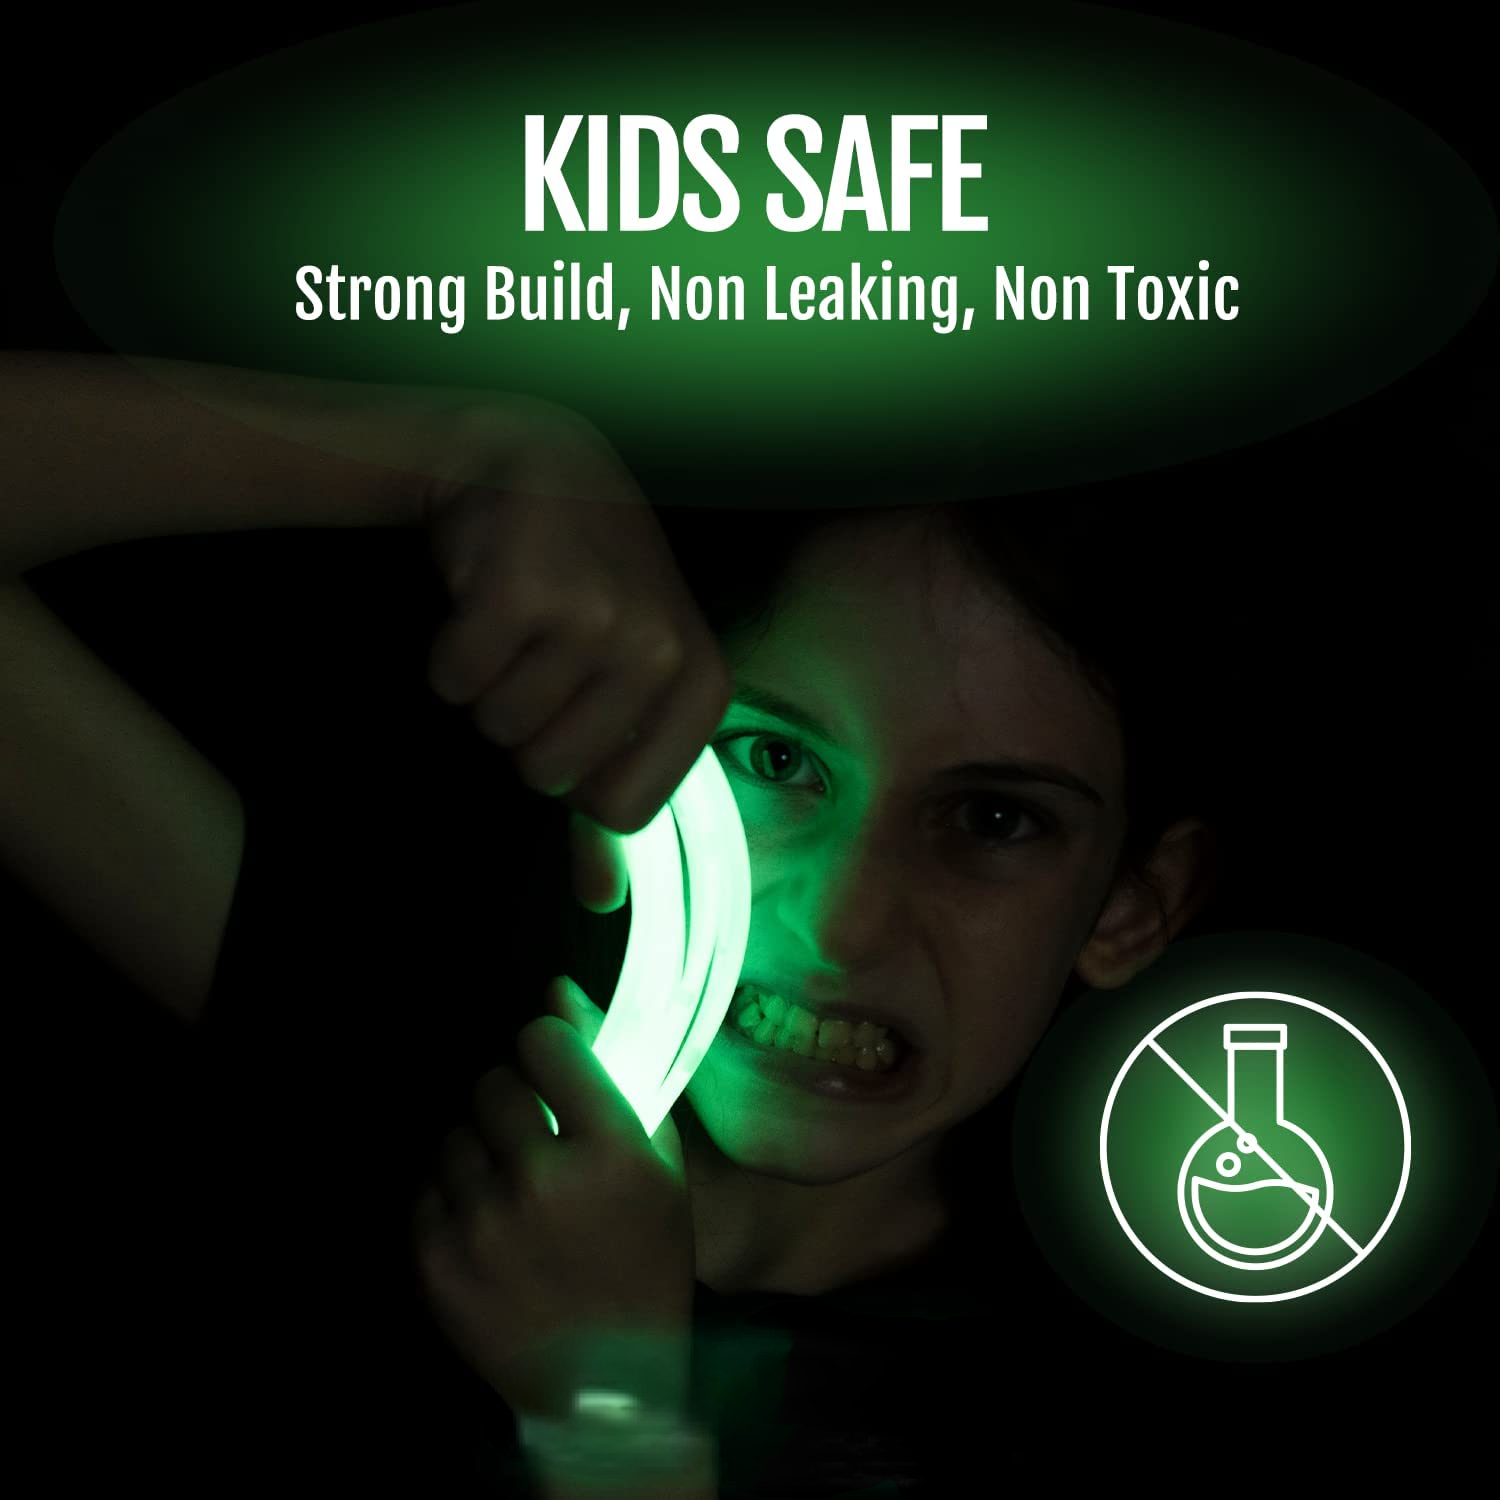 Ultra Bright Glow Sticks Bracelets And Necklaces Glow In The - Temu